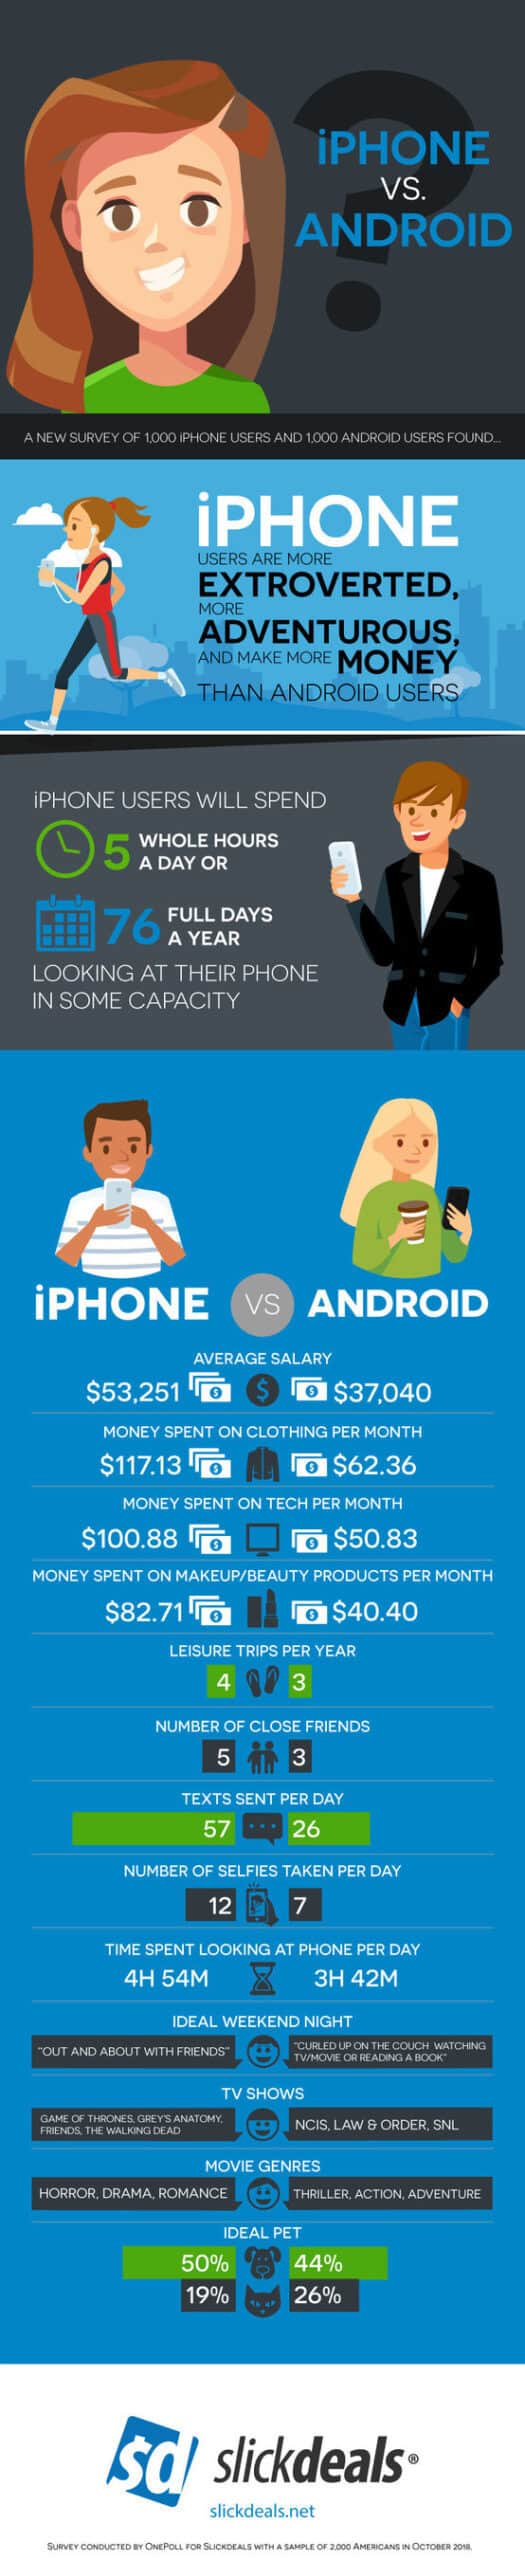 Slickdeals iPhone Vs Android Infographic 1 scaled